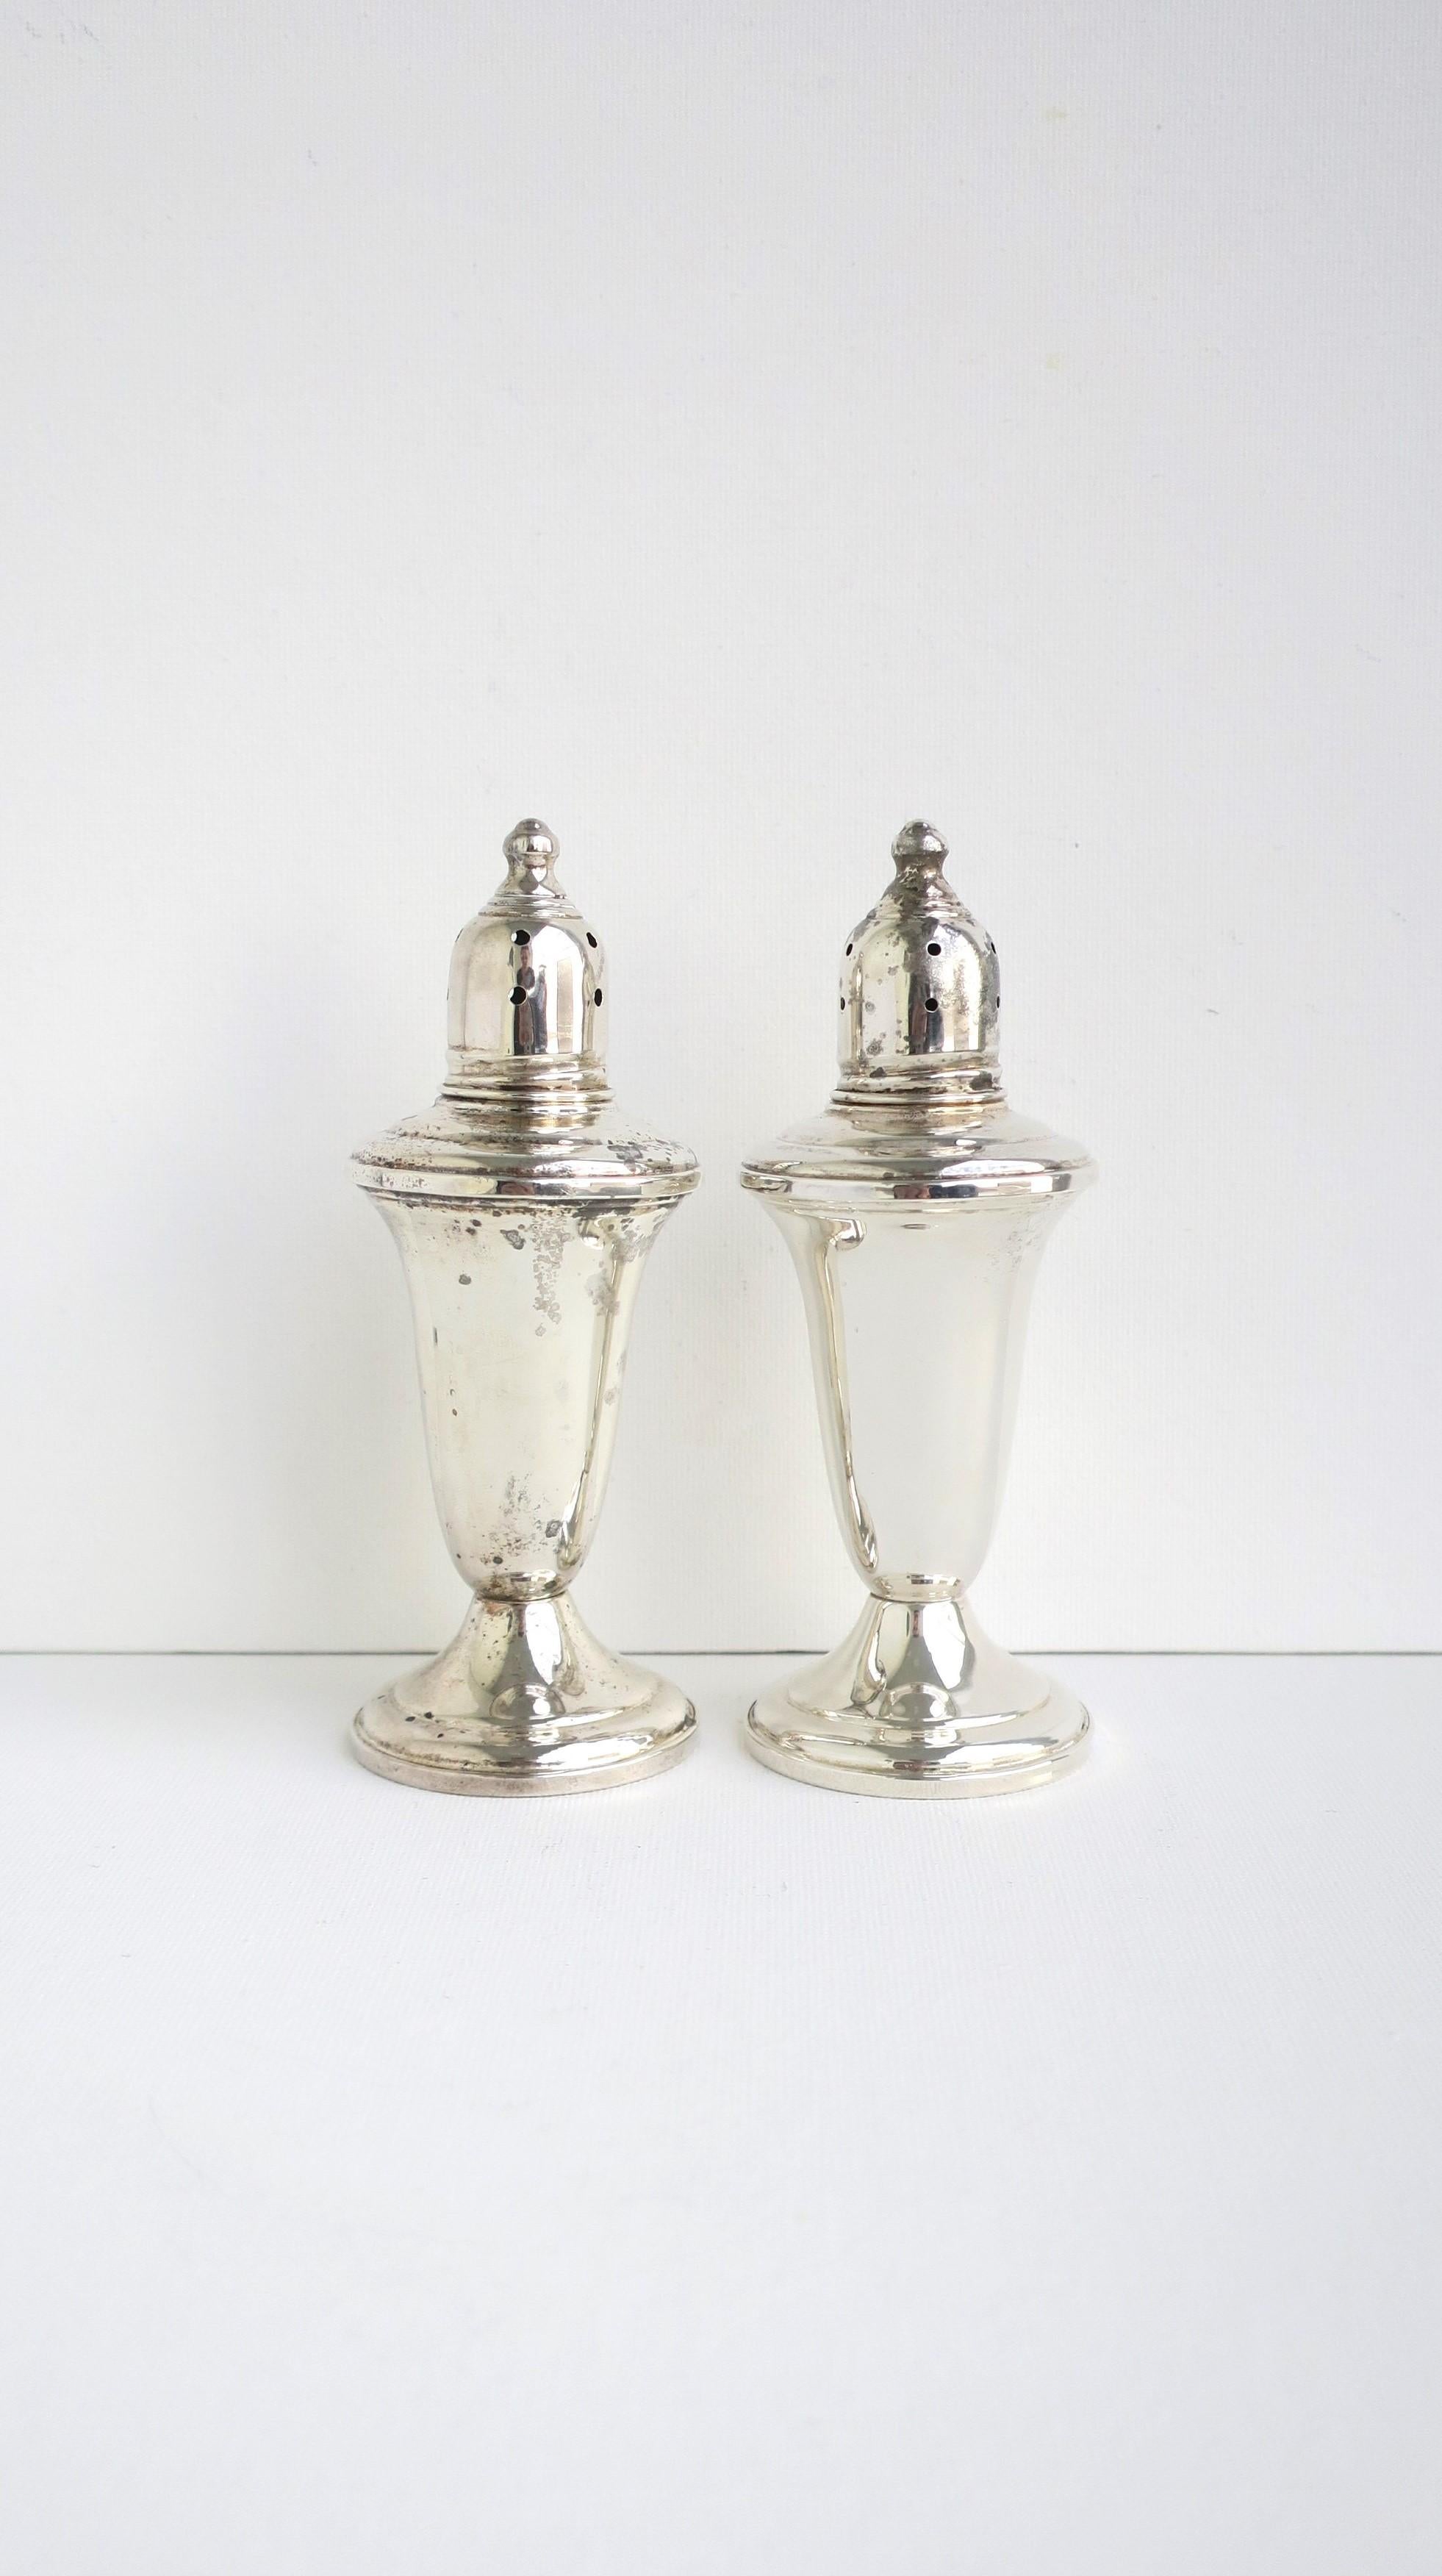 A pair of sterling silver salt and pepper shakers by Shreve Crump & Low, circa 20th century, USA. A great set for everyday use or special occasions. Dimensions: 4.75